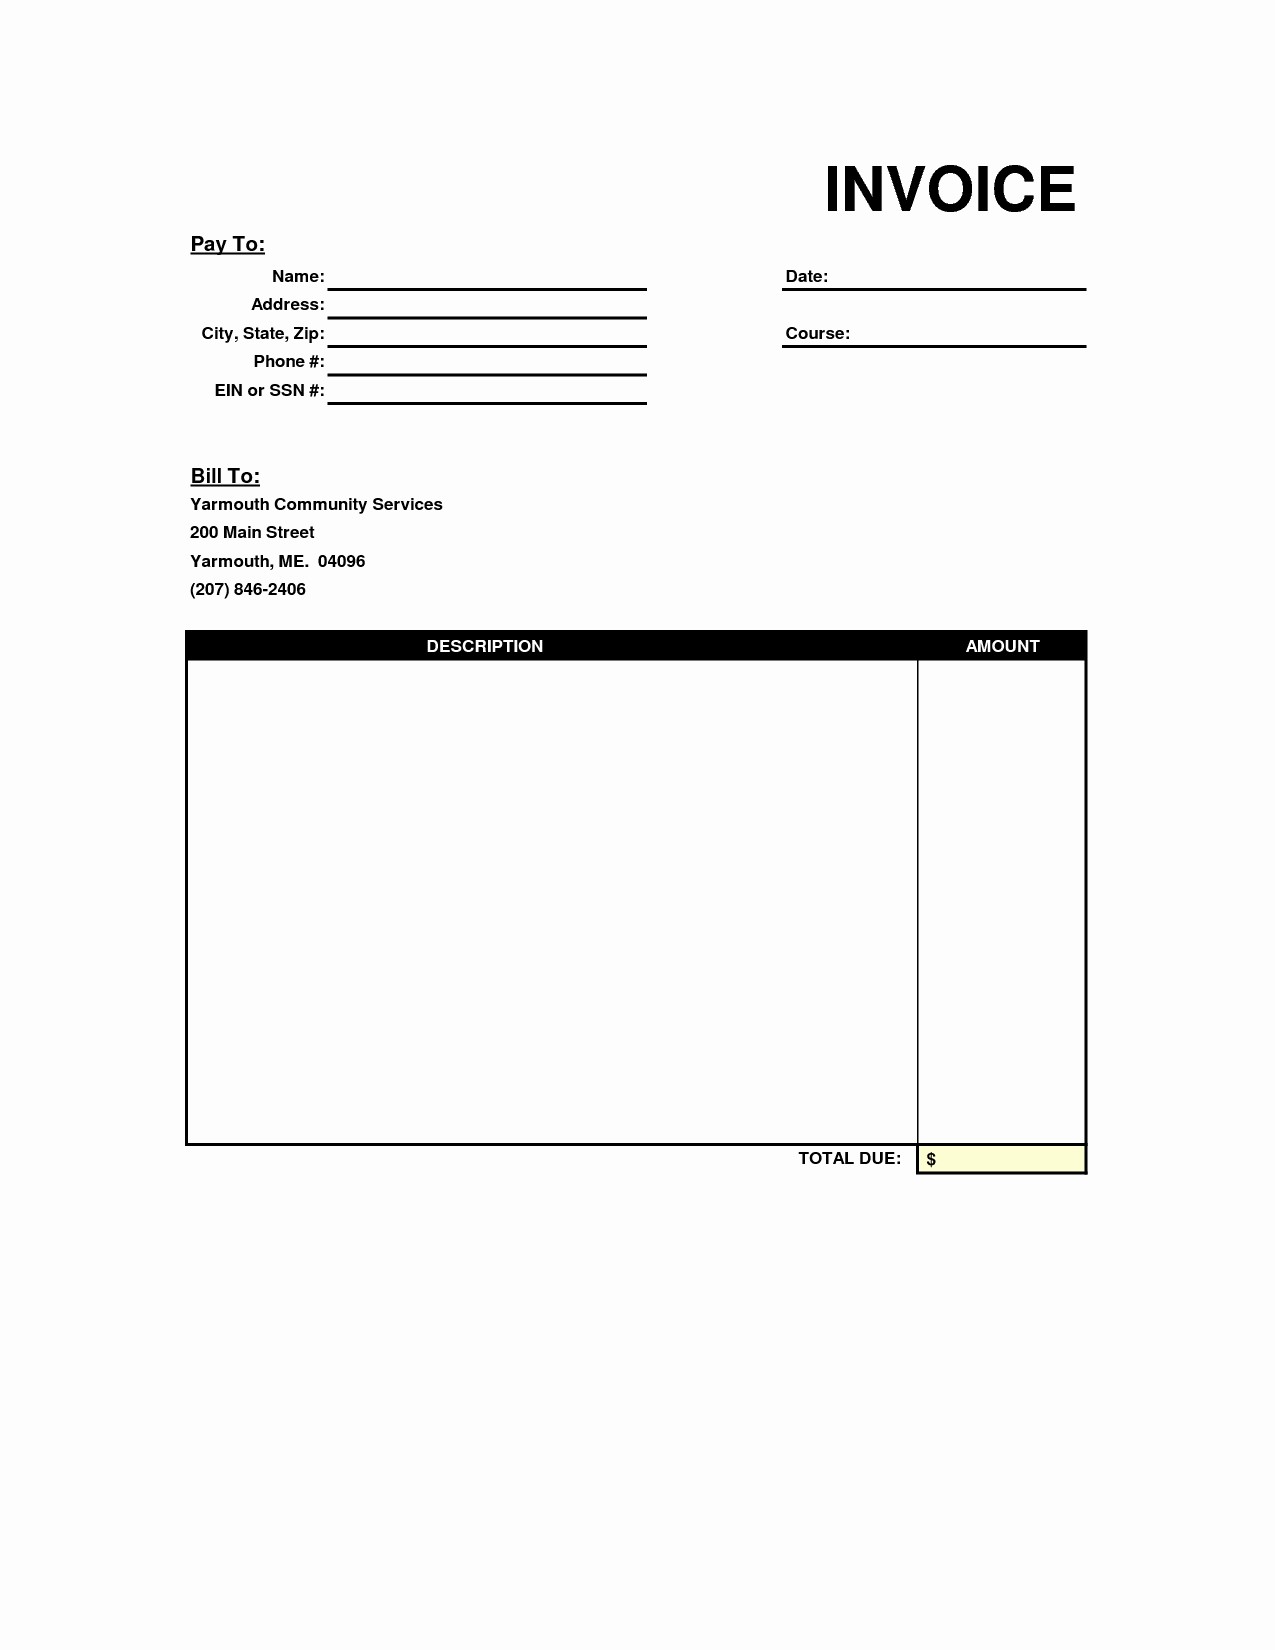 Copy Of A Blank Invoice Inspirational Copy Blank Invoice Invoice Template Ideas